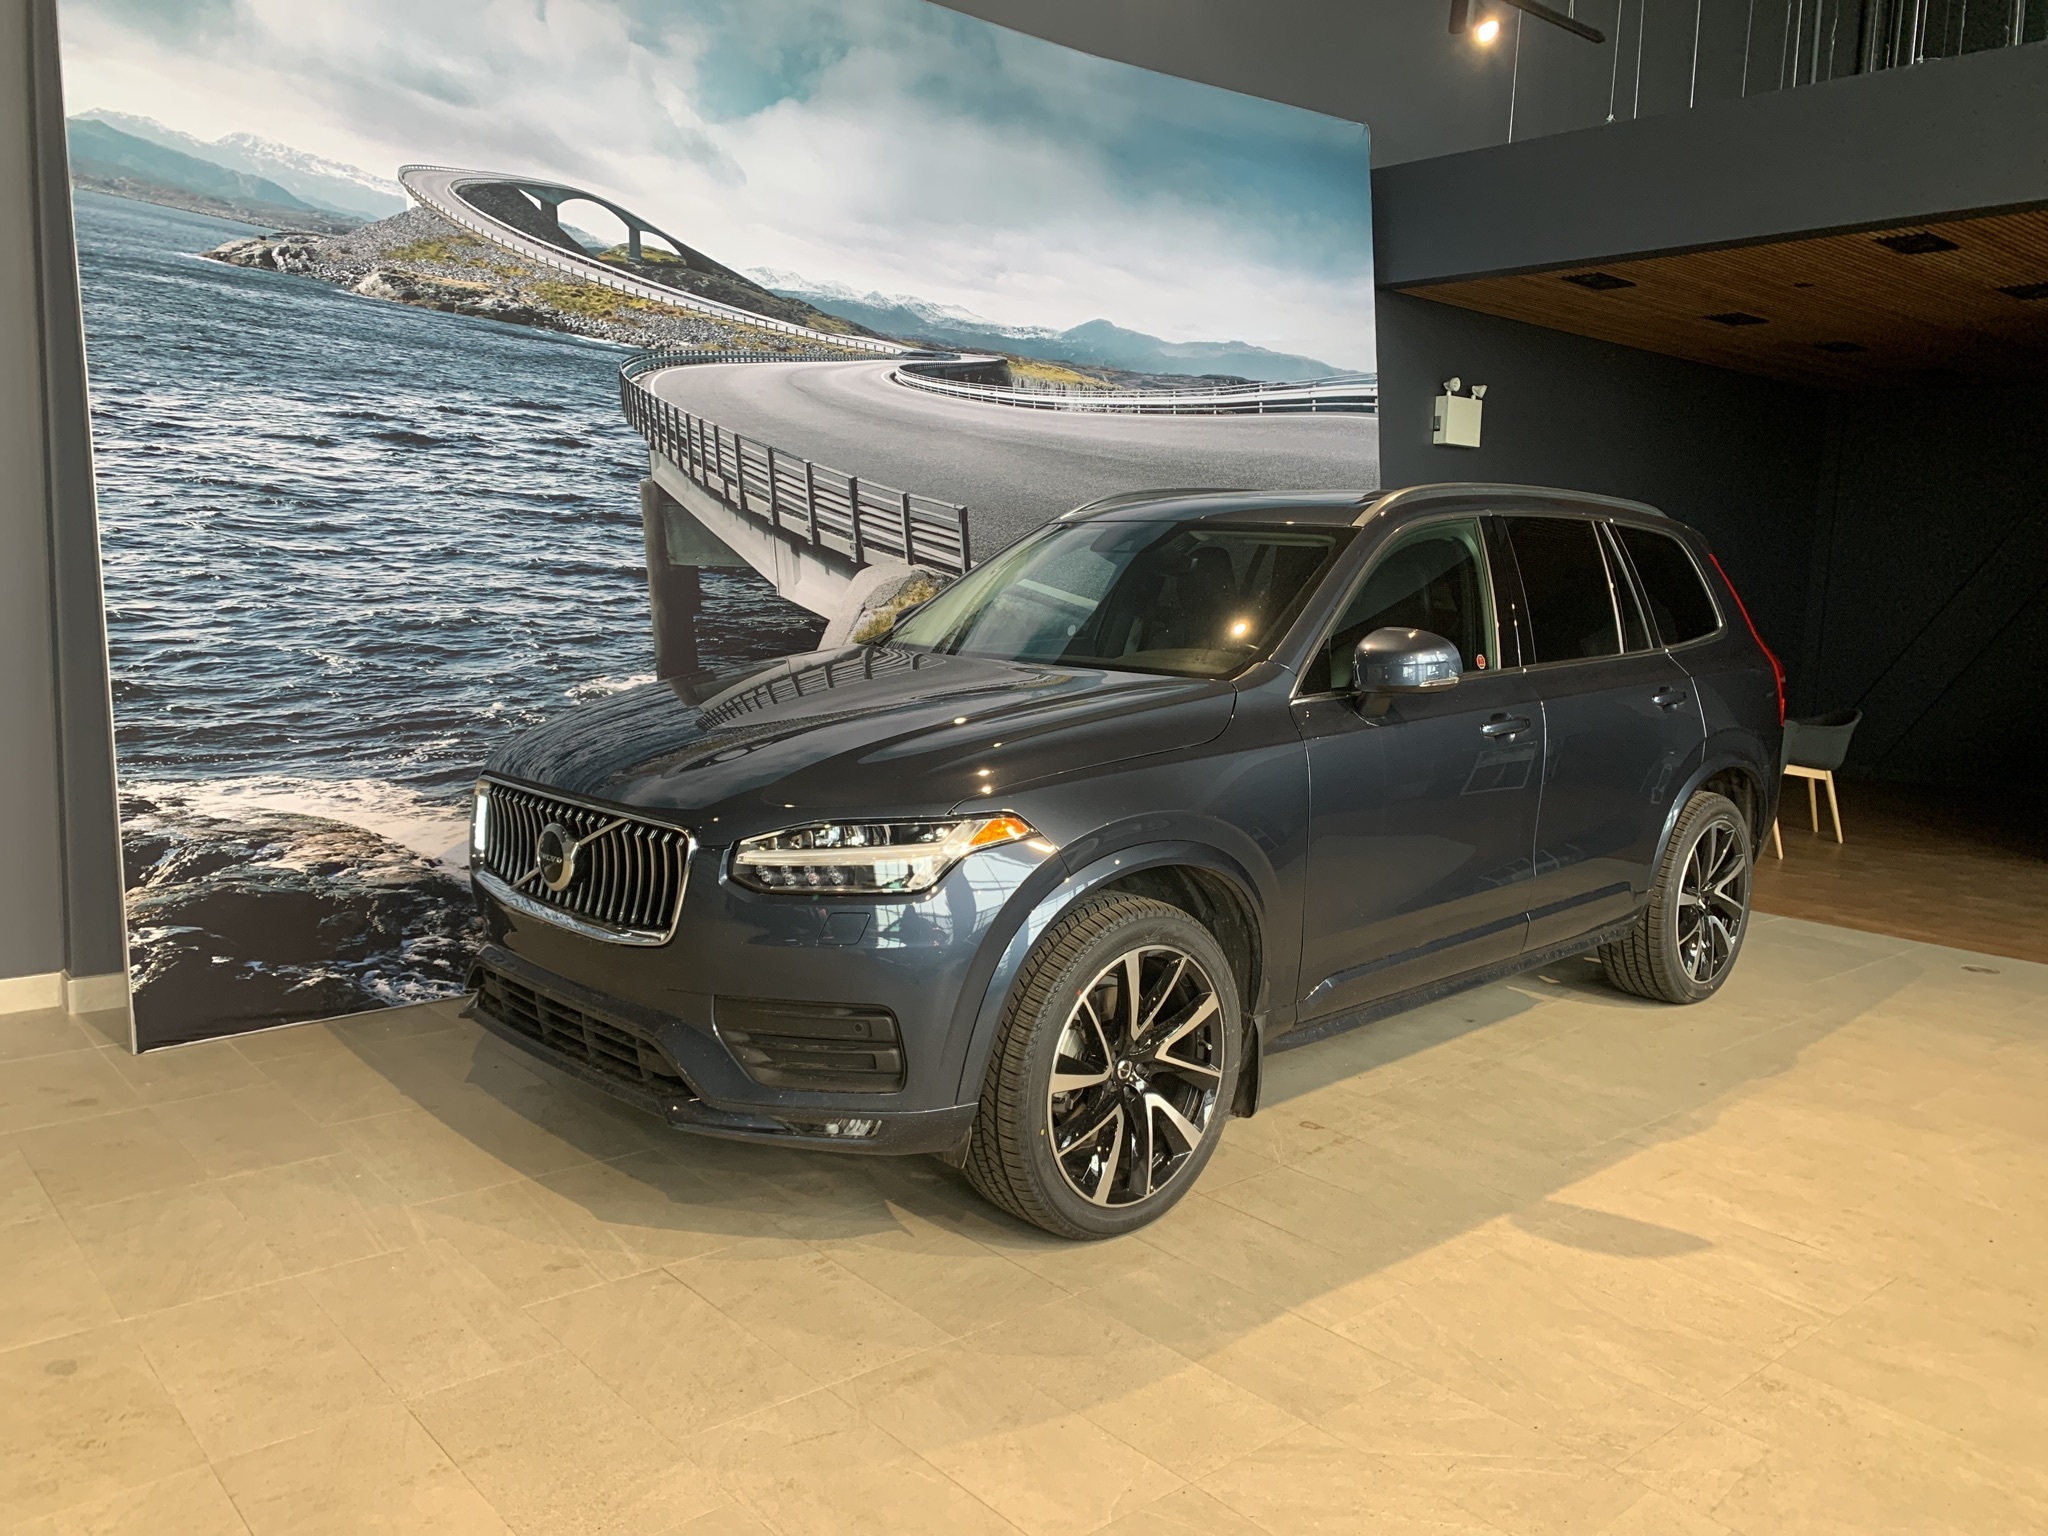 2021 Volvo XC90 T6 AWD Momentum (7-Seat) FROM 3.99%